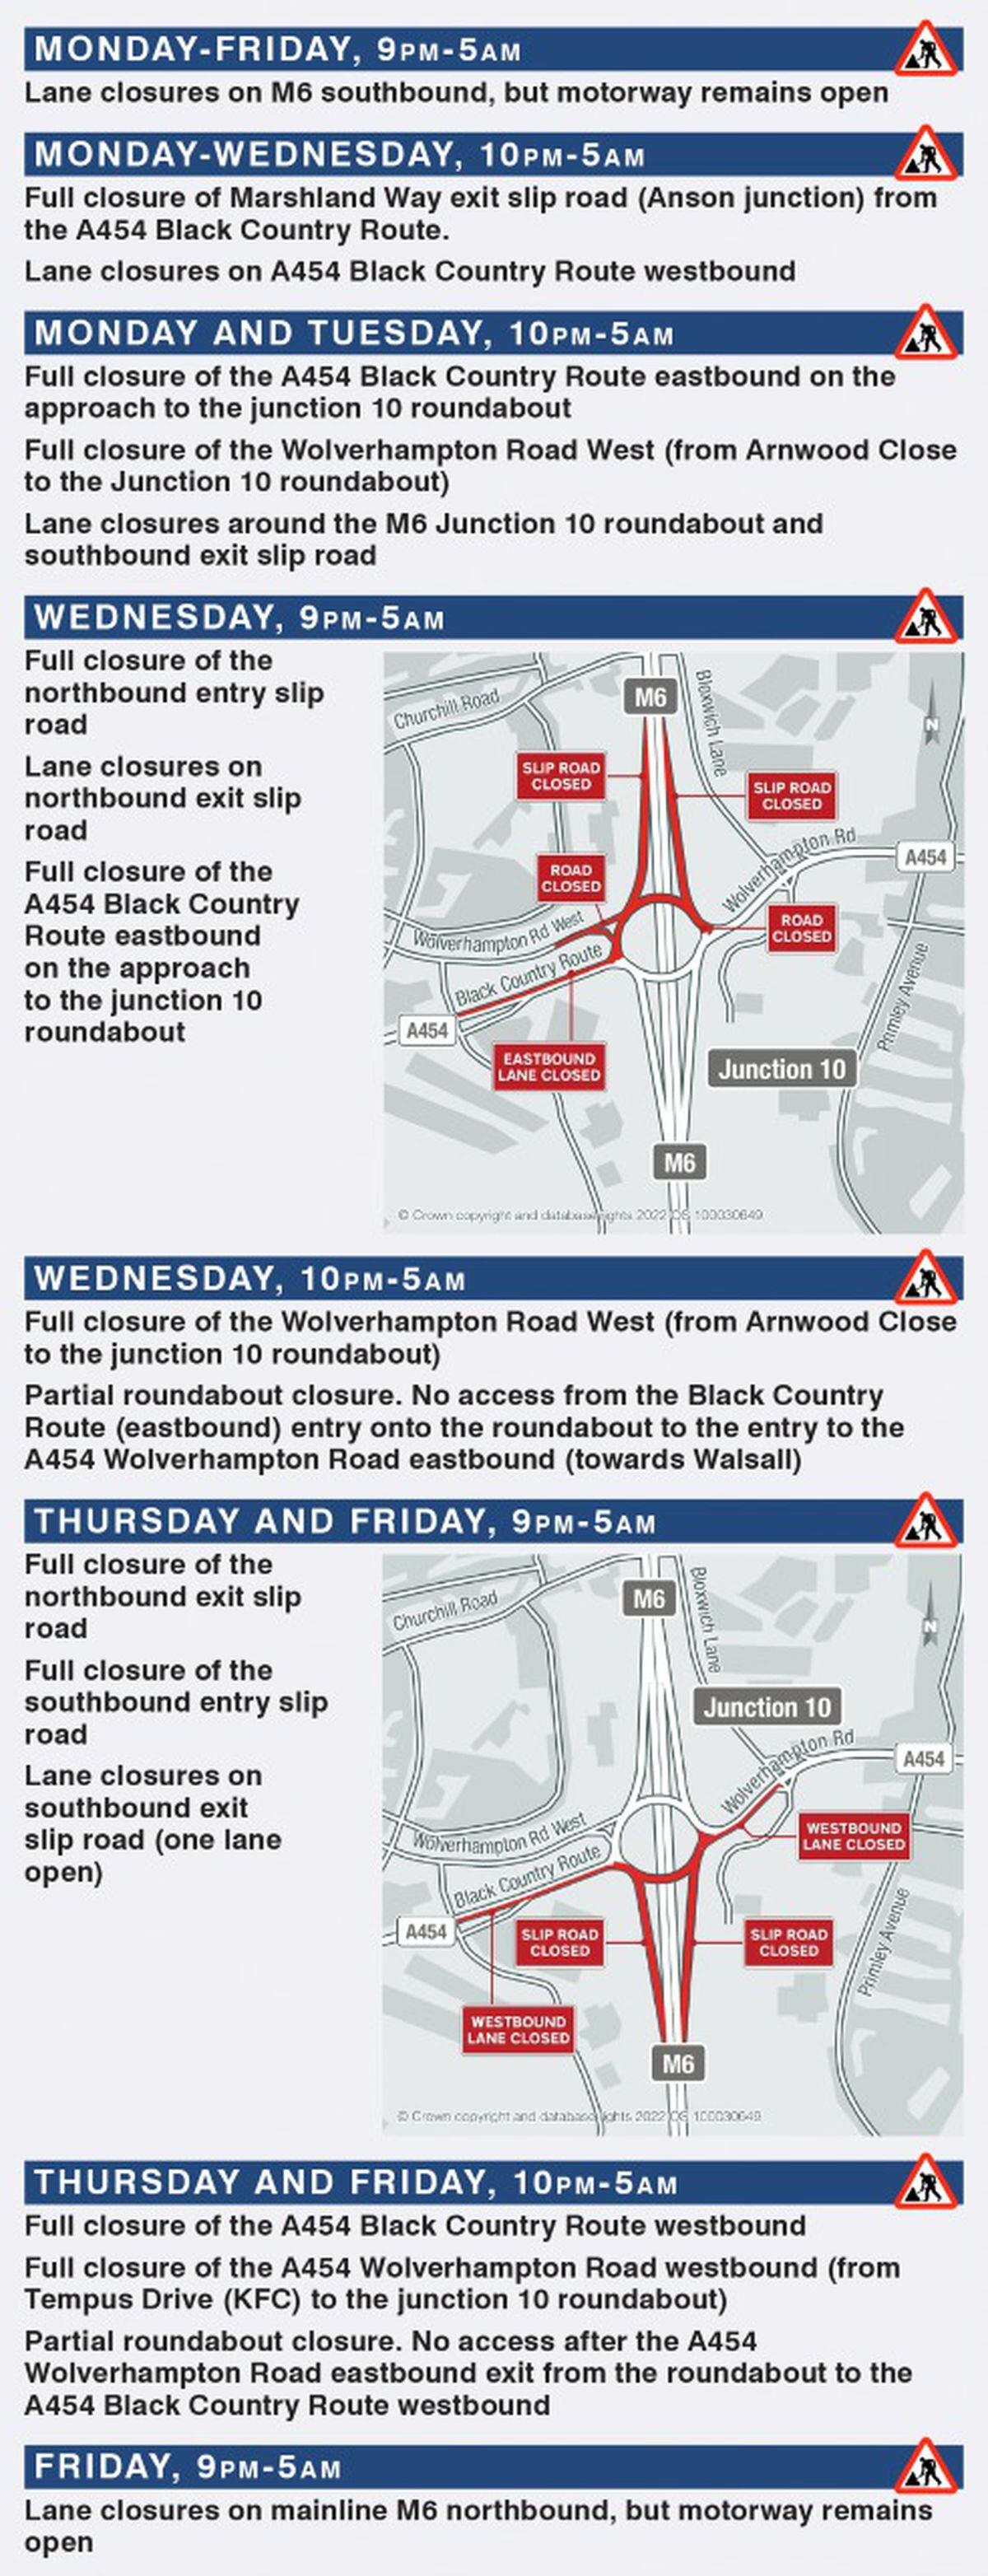 More road closures have been announced as the works continue